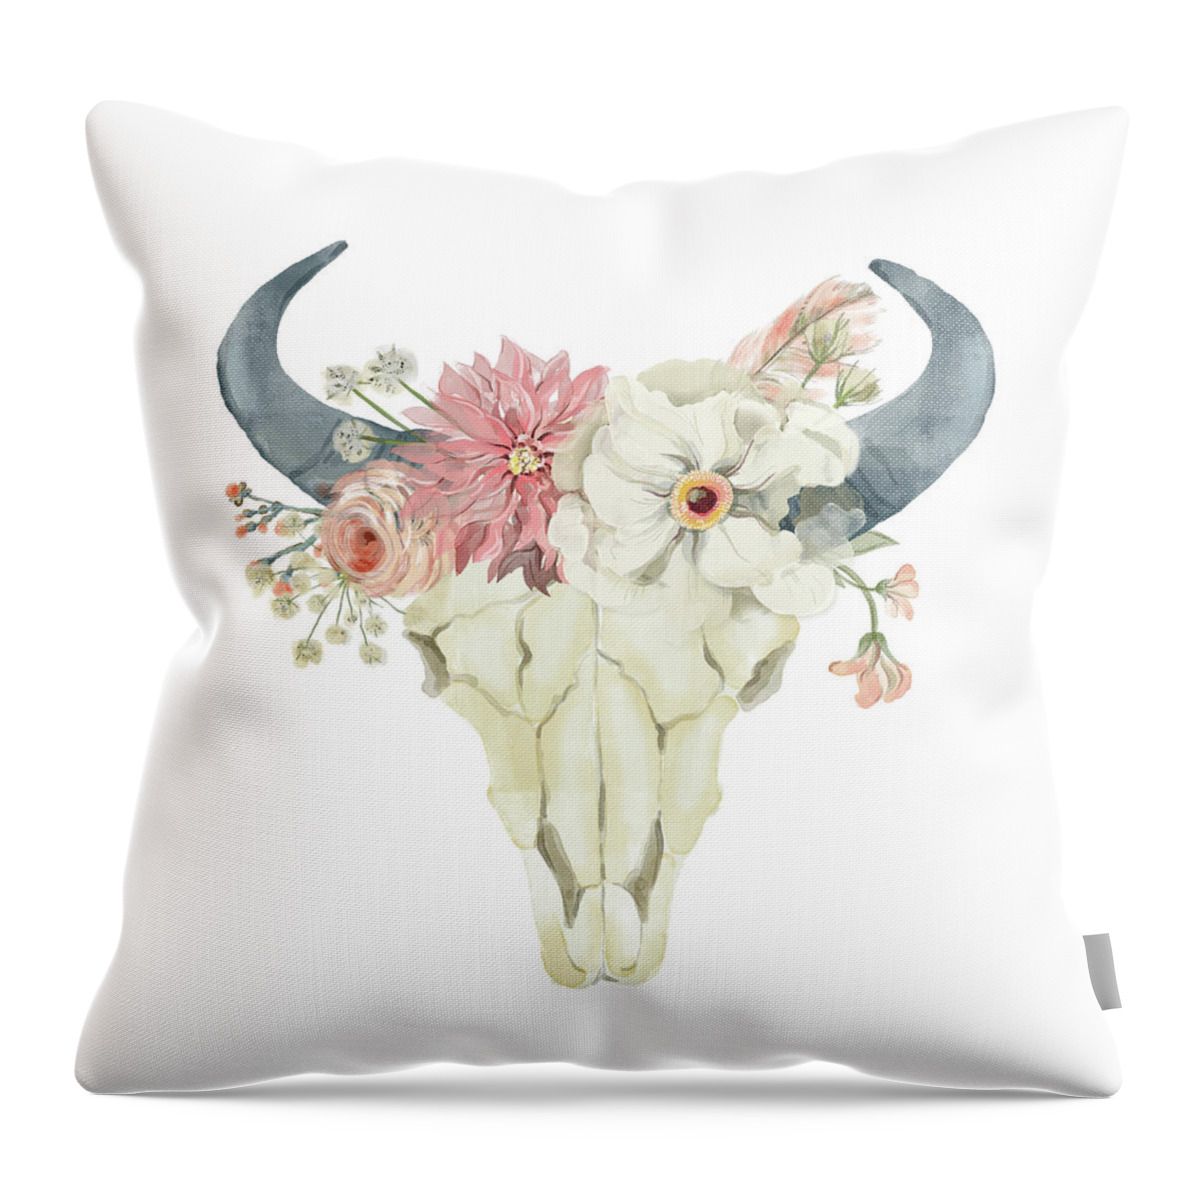 Bull Throw Pillow featuring the digital art Boho Bull Skull Watercolor Floral Anemone Tribal Decor by Pink Forest Cafe